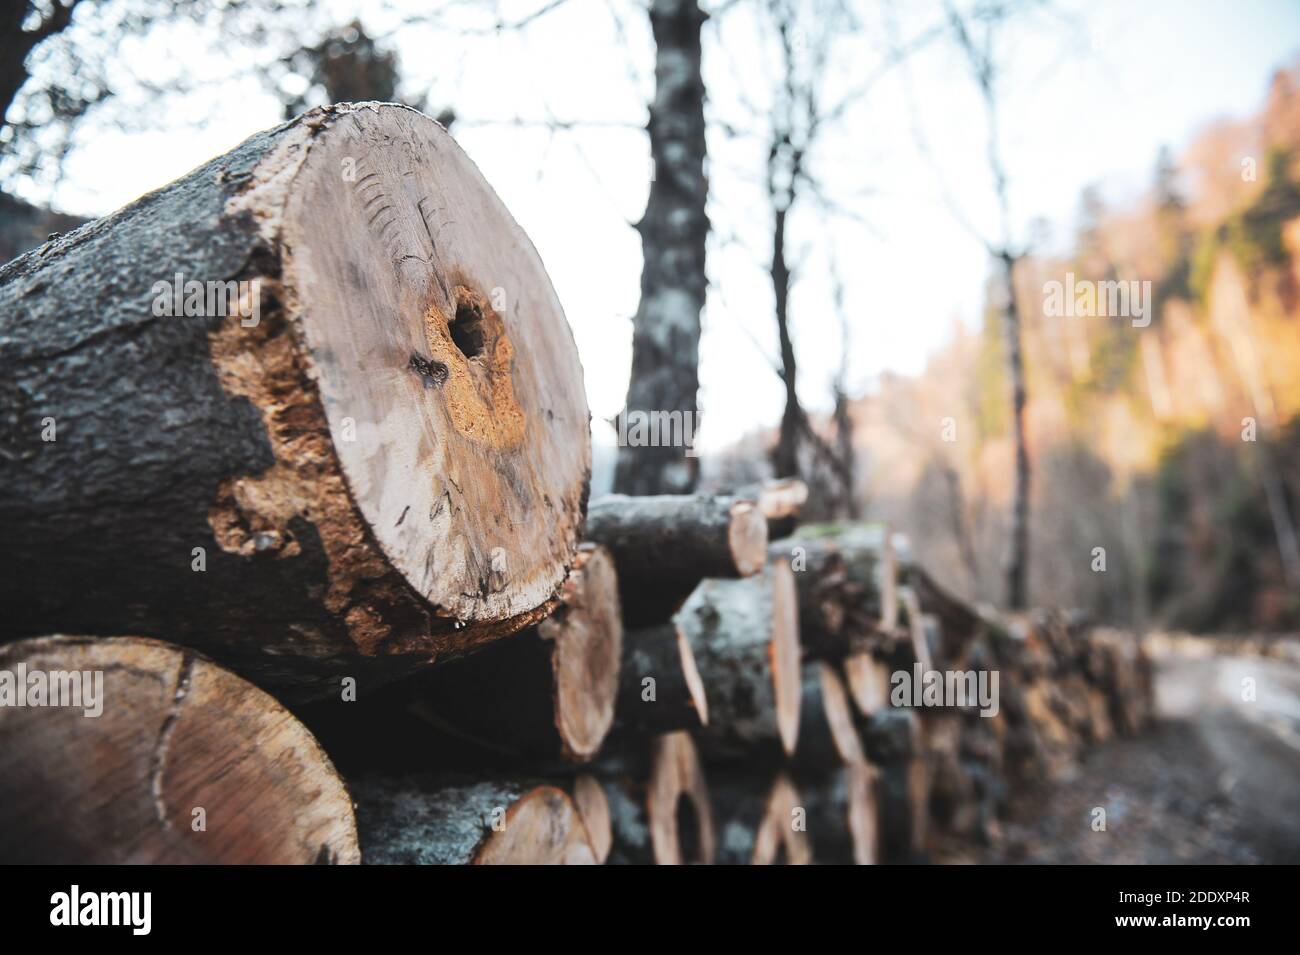 Details with logs and cut down trees in a Romanian forest. Stock Photo